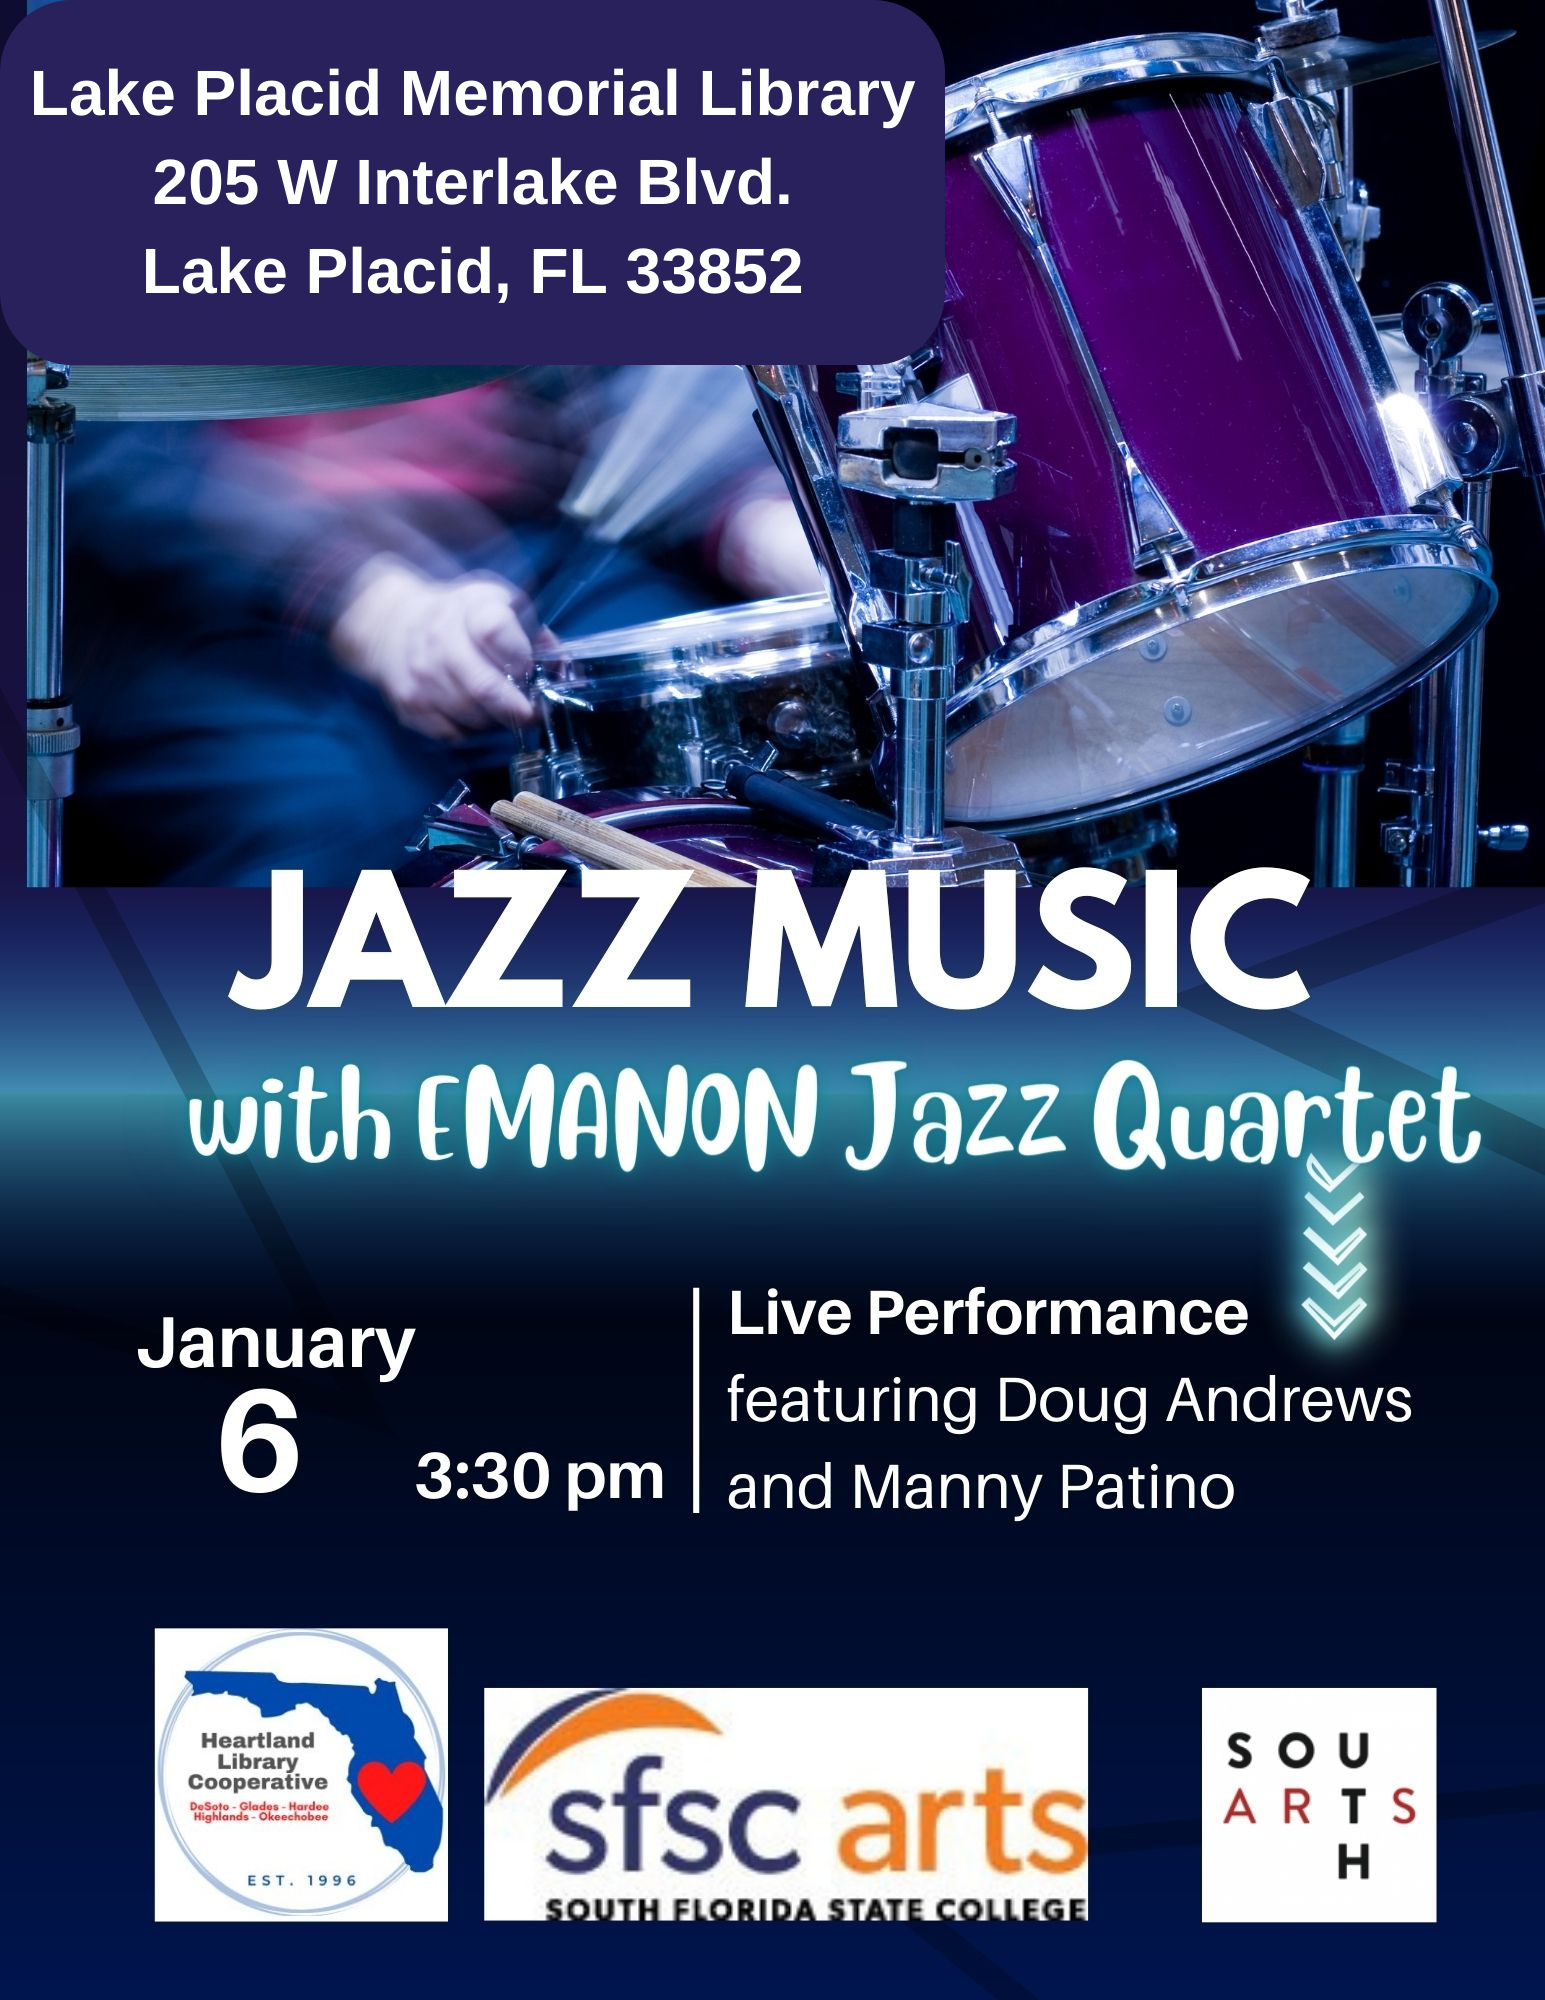 Jazz concert at the Lake Placid library on January 6 at 3:30 p.m.